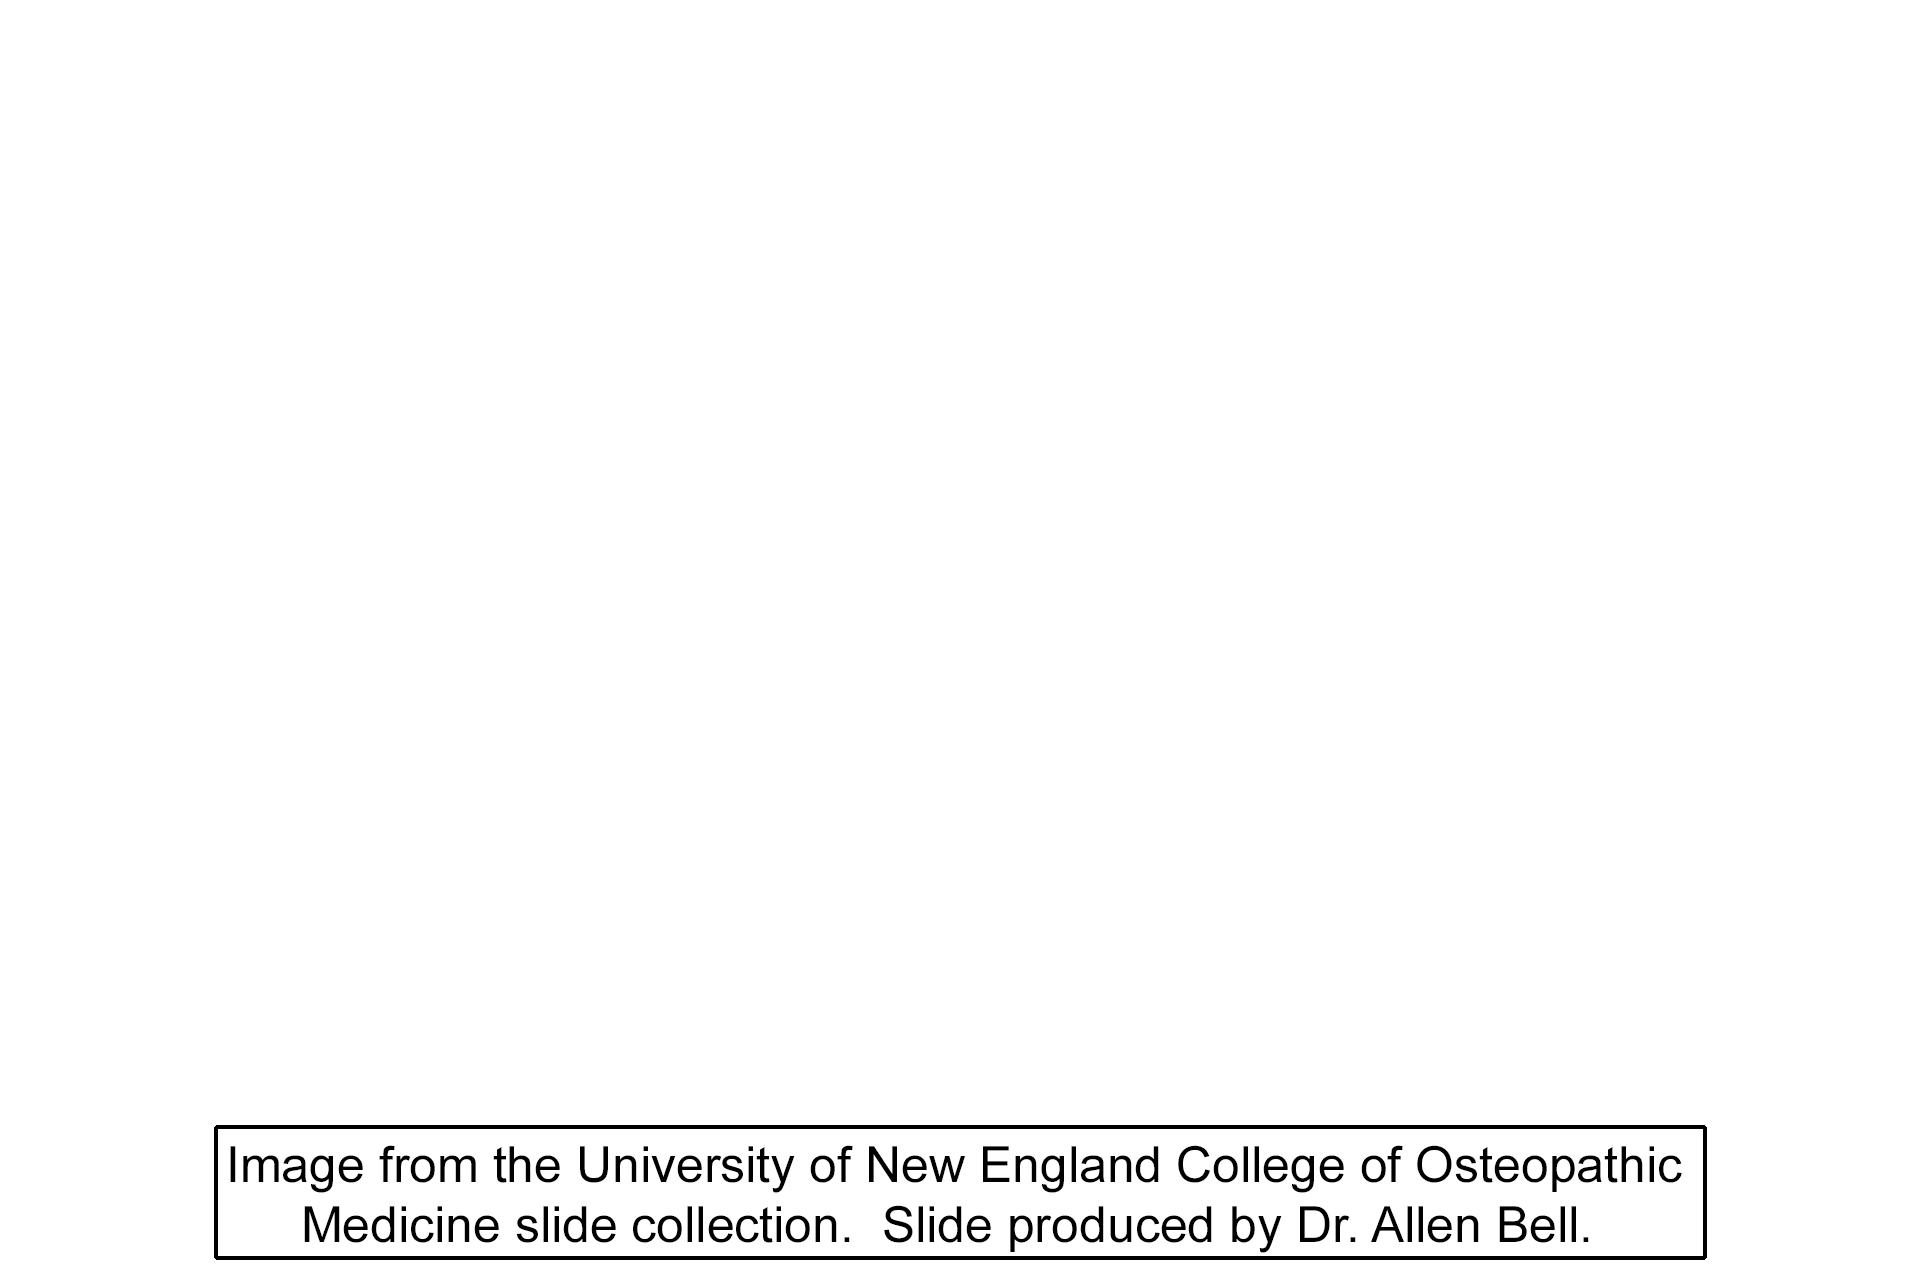 Image credit > <p>Image taken of a slide from the University of New England College of Osteopathic Medicine collection.  The slide was produced by Dr. Allen Bell.</p>
